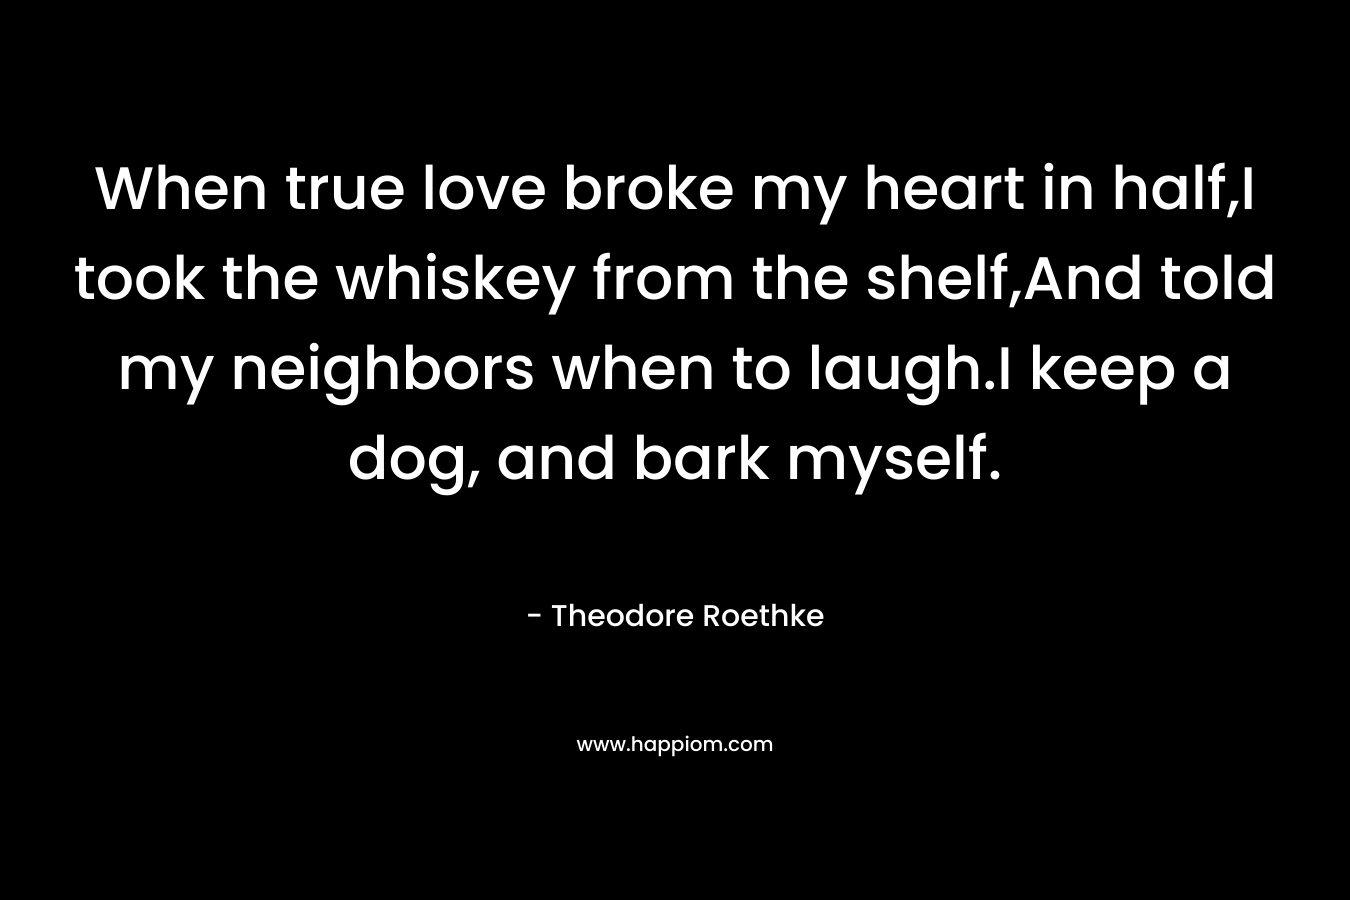 When true love broke my heart in half,I took the whiskey from the shelf,And told my neighbors when to laugh.I keep a dog, and bark myself. – Theodore Roethke